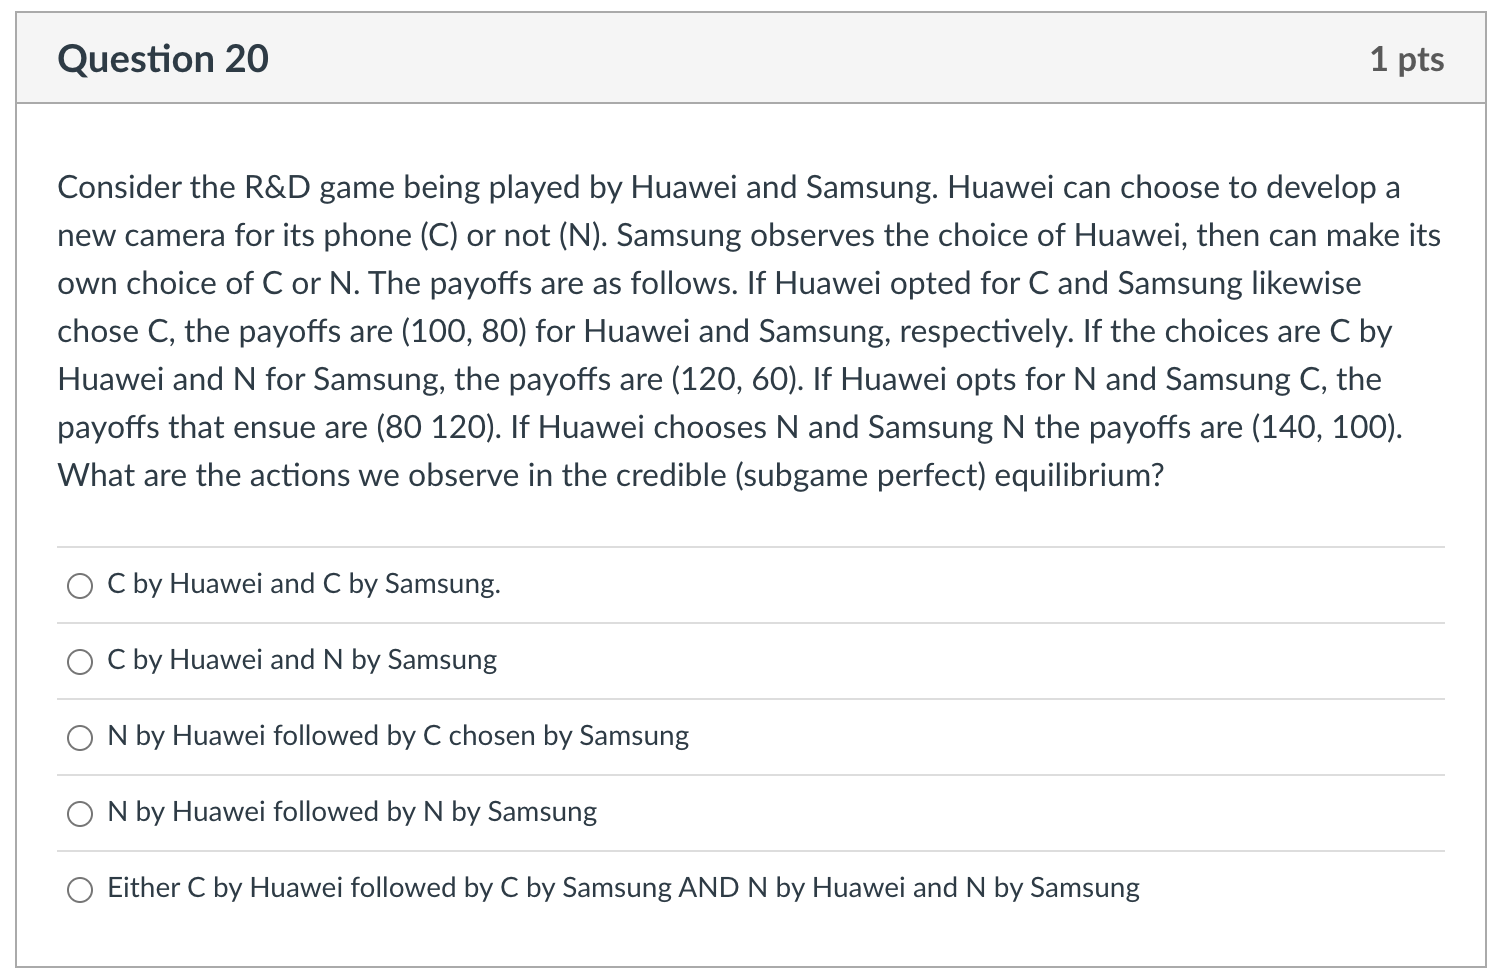 Consider the R&D game being played by Huawei and Samsung. Huawei can choose to develop a new camera for its phone (C) or not